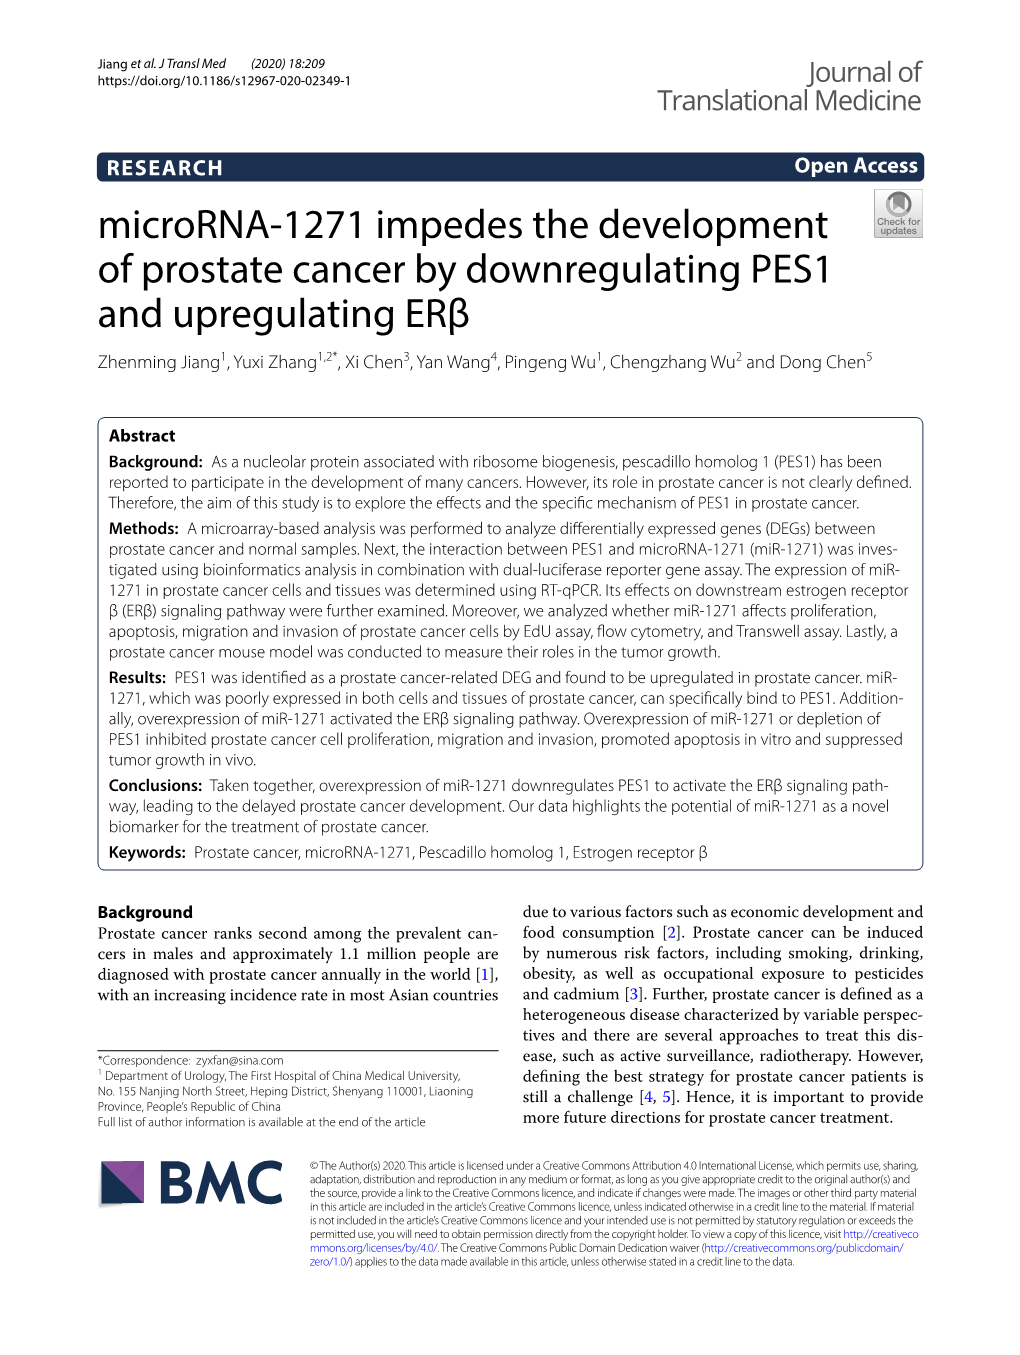 Microrna-1271 Impedes the Development of Prostate Cancer By